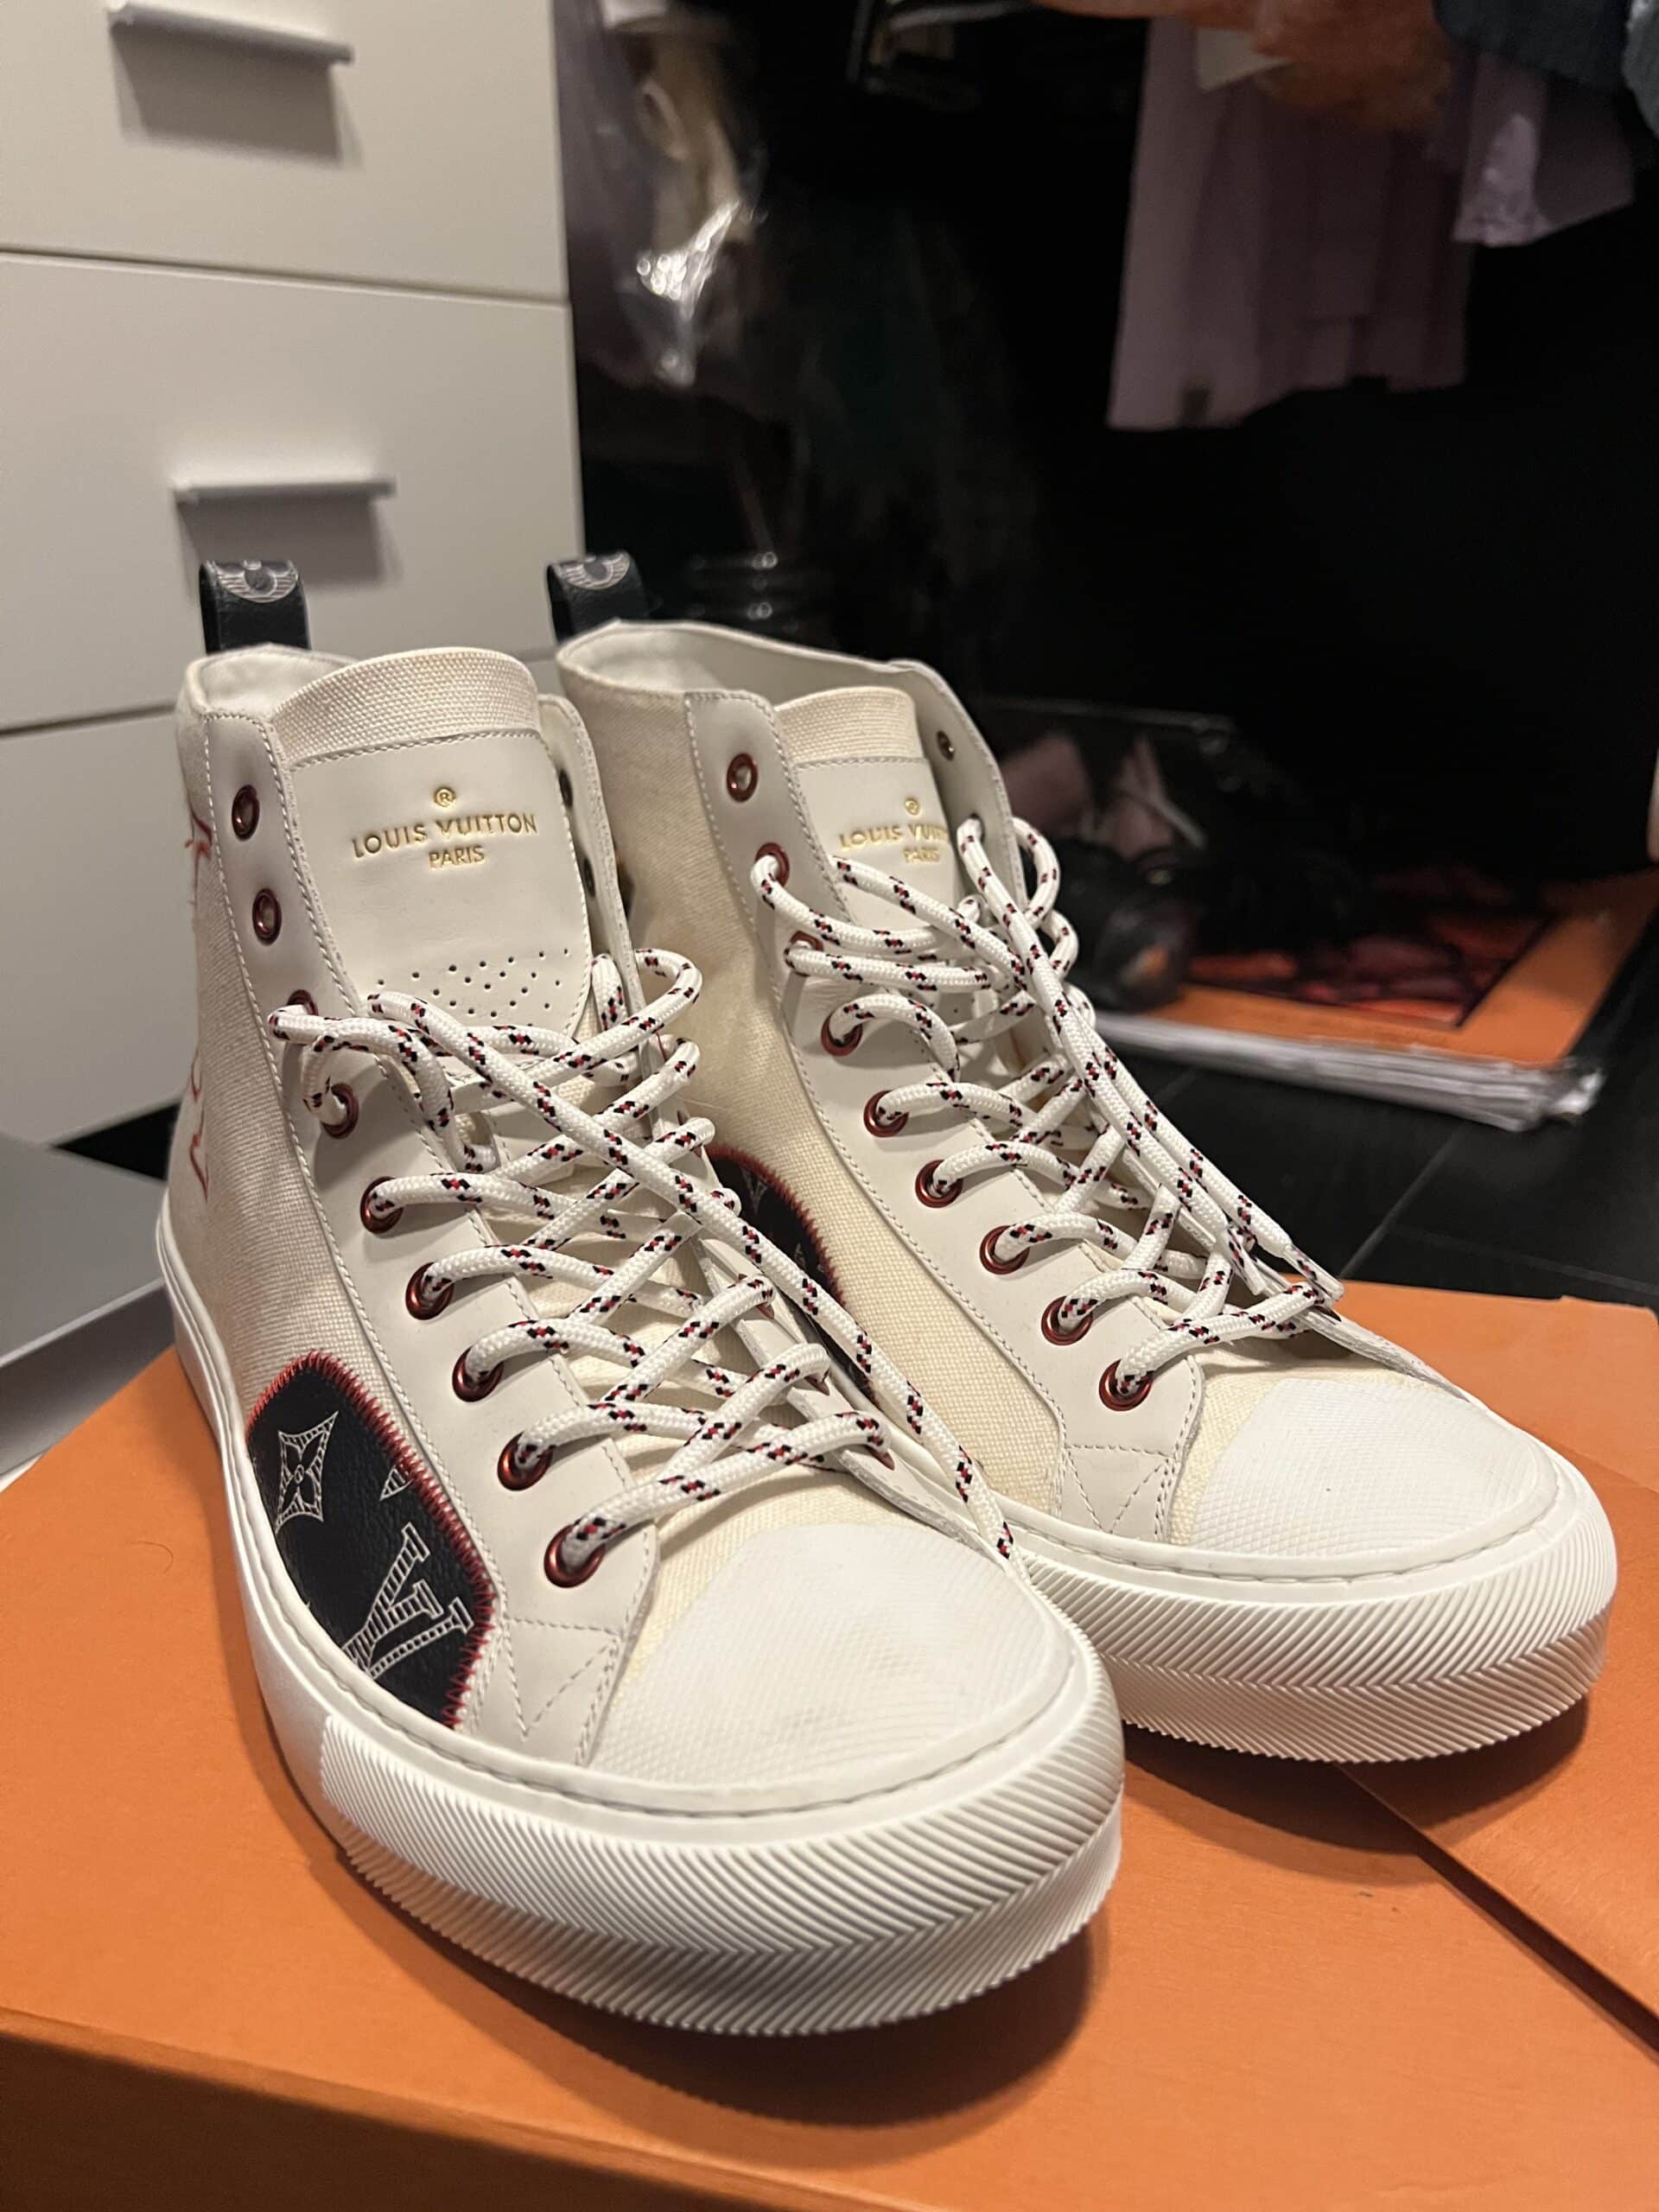 Louis Vuitton White & Red Gradient Tattoo High Top Sneakers